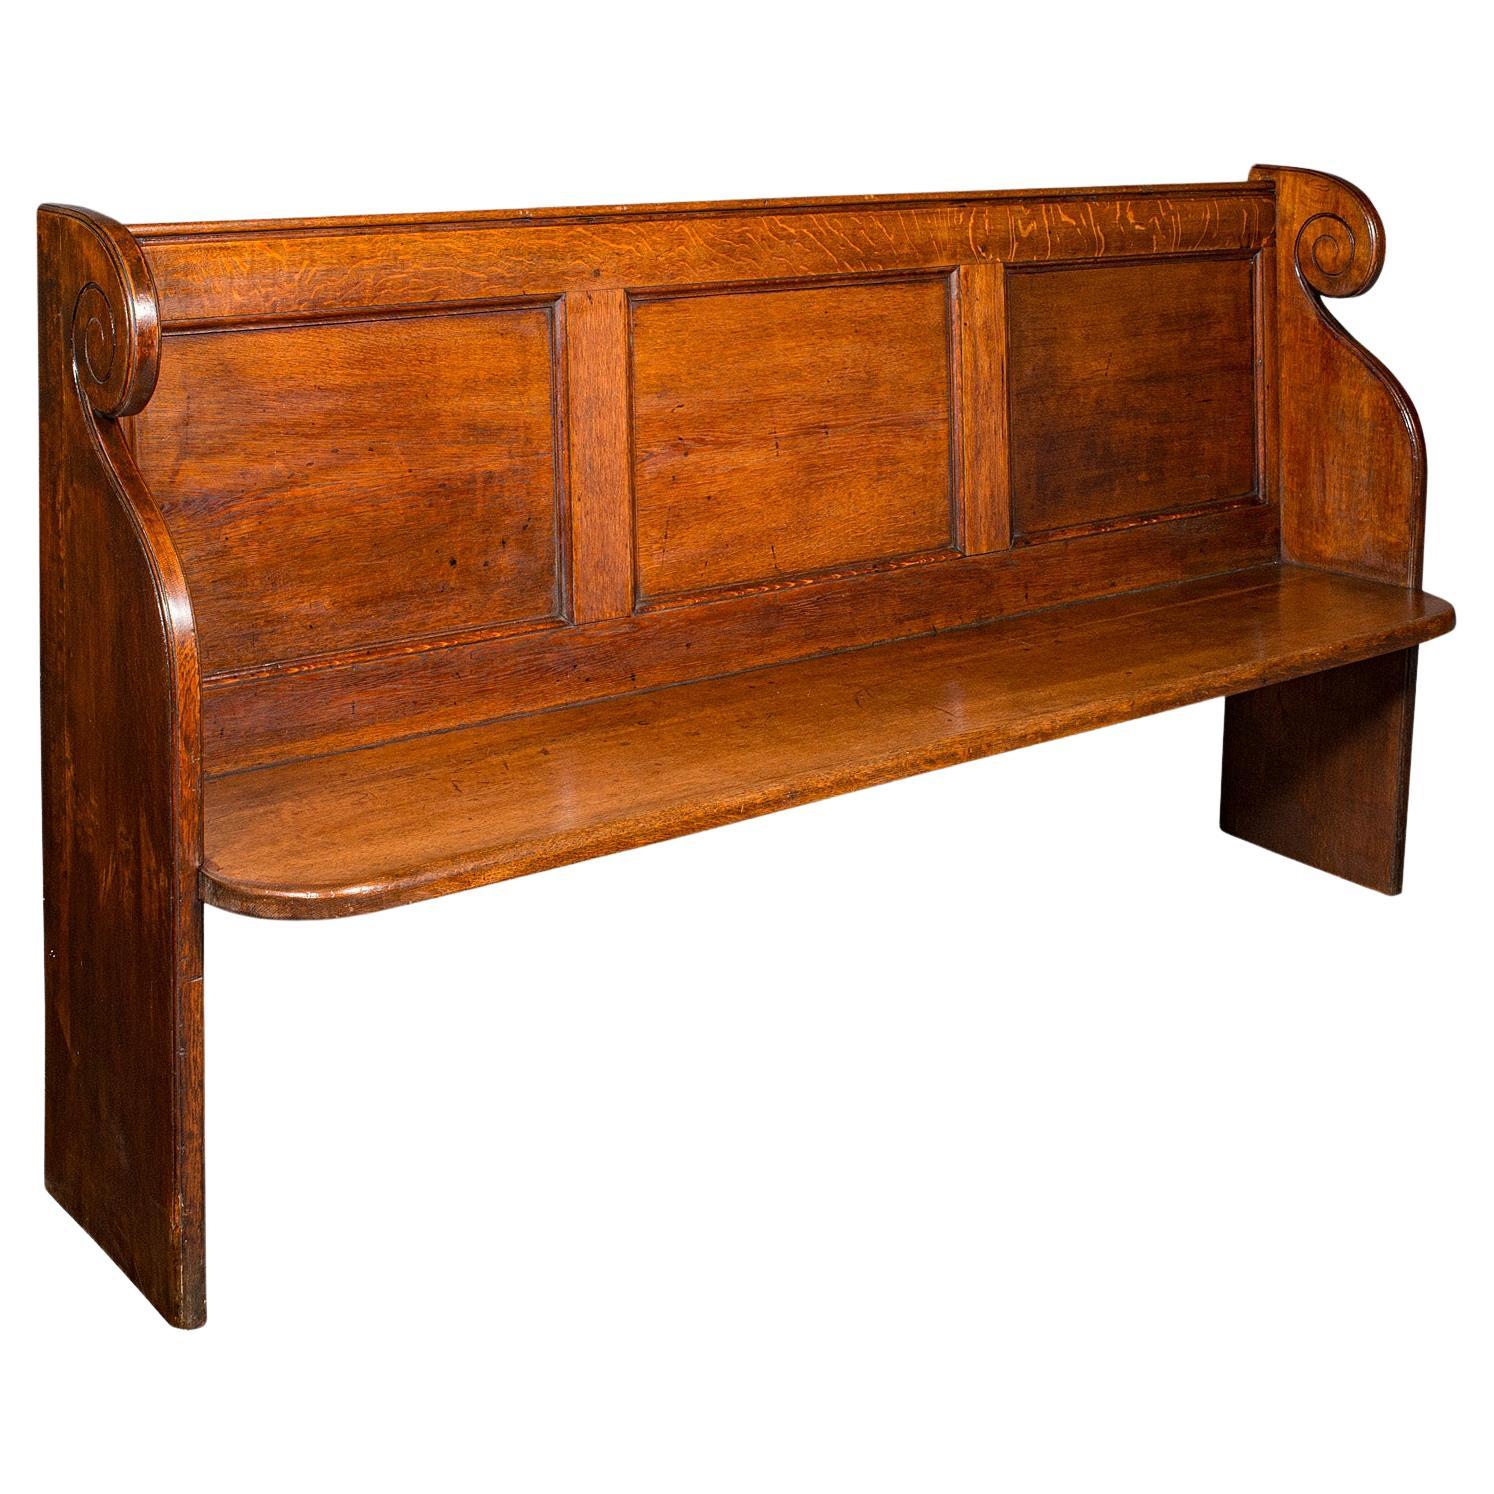 Antique Panelled Church Pew, English, Oak Bench, Ecclesiastic, Victorian, C.1850 For Sale